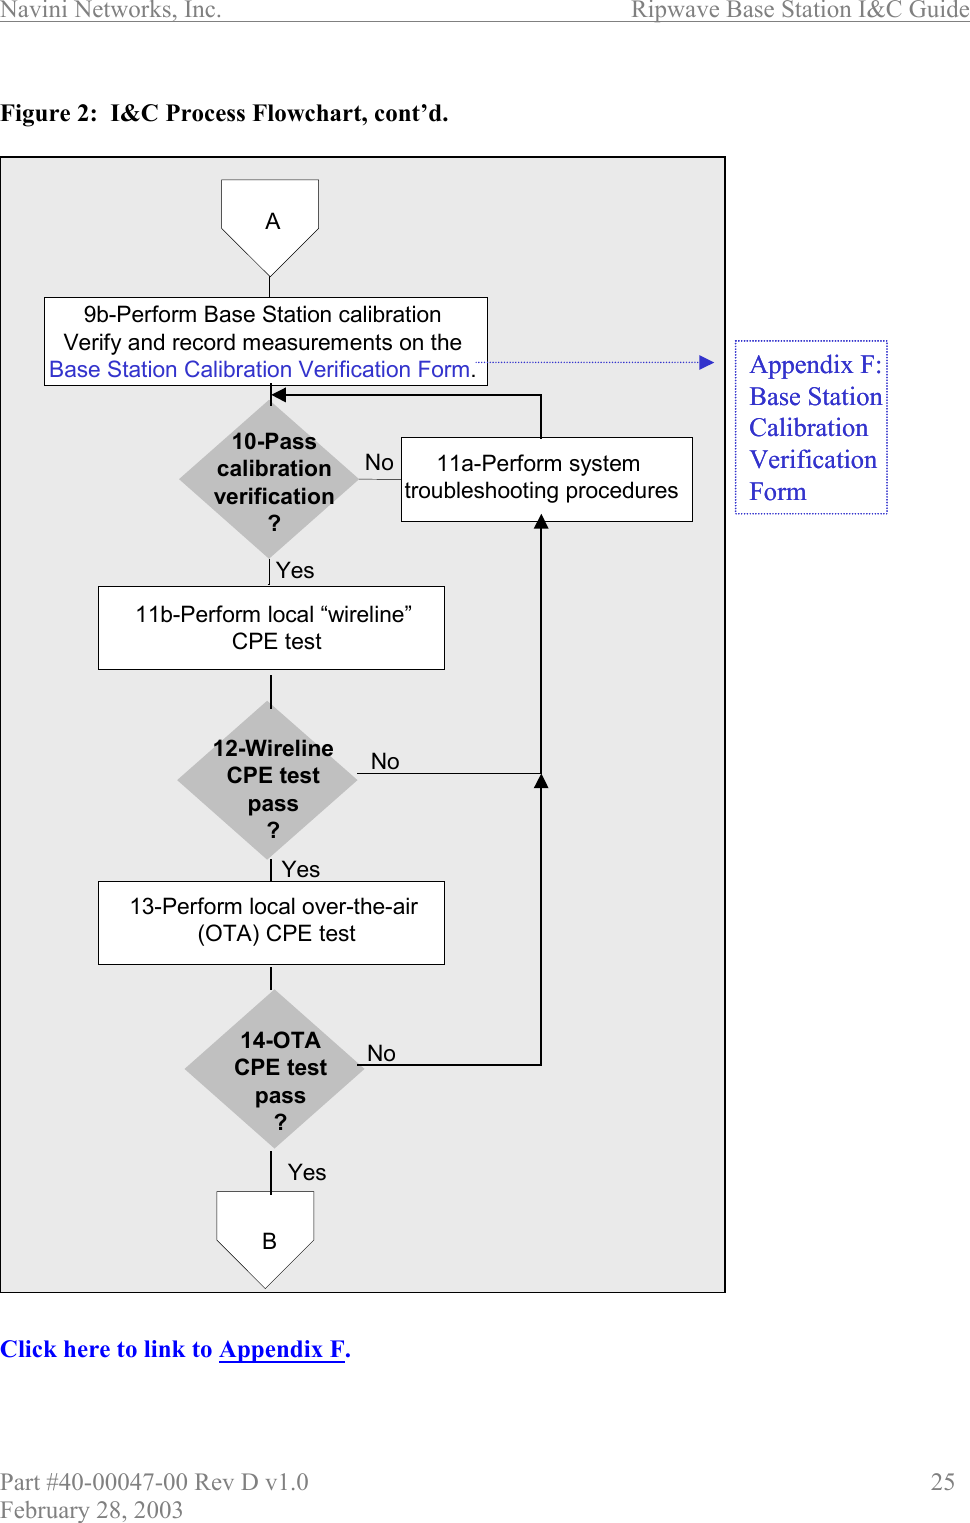 Navini Networks, Inc.                          Ripwave Base Station I&amp;C Guide Part #40-00047-00 Rev D v1.0                     25 February 28, 2003  Figure 2:  I&amp;C Process Flowchart, cont’d.                                           Click here to link to Appendix F. 11b-Perform local “wireline” CPE test9b-Perform Base Station calibrationVerify and record measurements on theBase Station Calibration Verification Form.10-Passcalibrationverification?11a-Perform system troubleshooting proceduresNoYesA13-Perform local over-the-air (OTA) CPE test12-WirelineCPE testpass?NoYes14-OTACPE testpass?NoYesBAppendix F:Base StationCalibrationVerificationForm11b-Perform local “wireline” CPE test9b-Perform Base Station calibrationVerify and record measurements on theBase Station Calibration Verification Form.10-Passcalibrationverification?11a-Perform system troubleshooting proceduresNoYesA13-Perform local over-the-air (OTA) CPE test12-WirelineCPE testpass?NoYes14-OTACPE testpass?NoYesBAppendix F:Base StationCalibrationVerificationForm